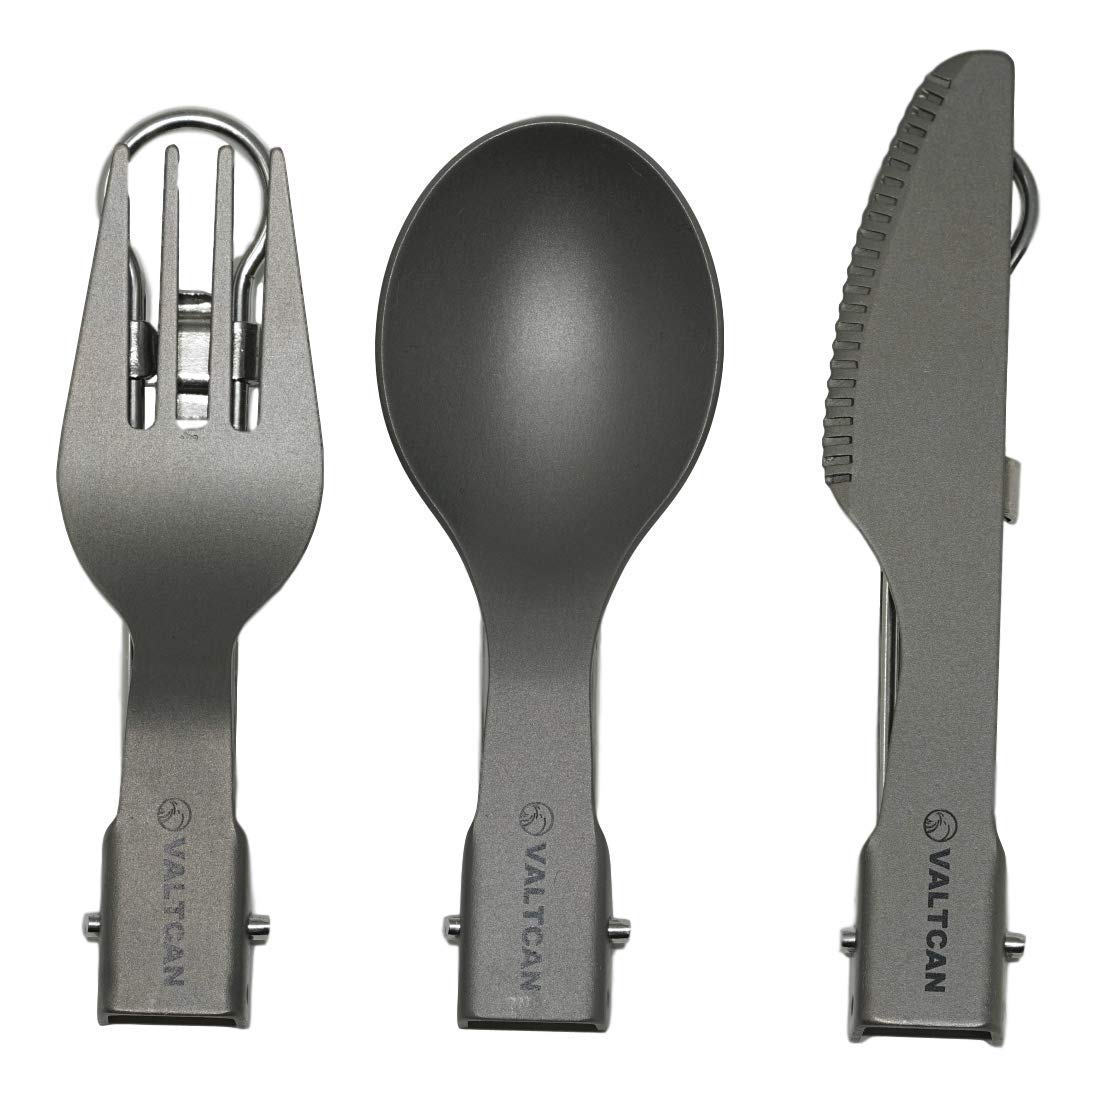 Portable Utensils, Travel Camping Cutlery Set, 10-Piece Including Knif –